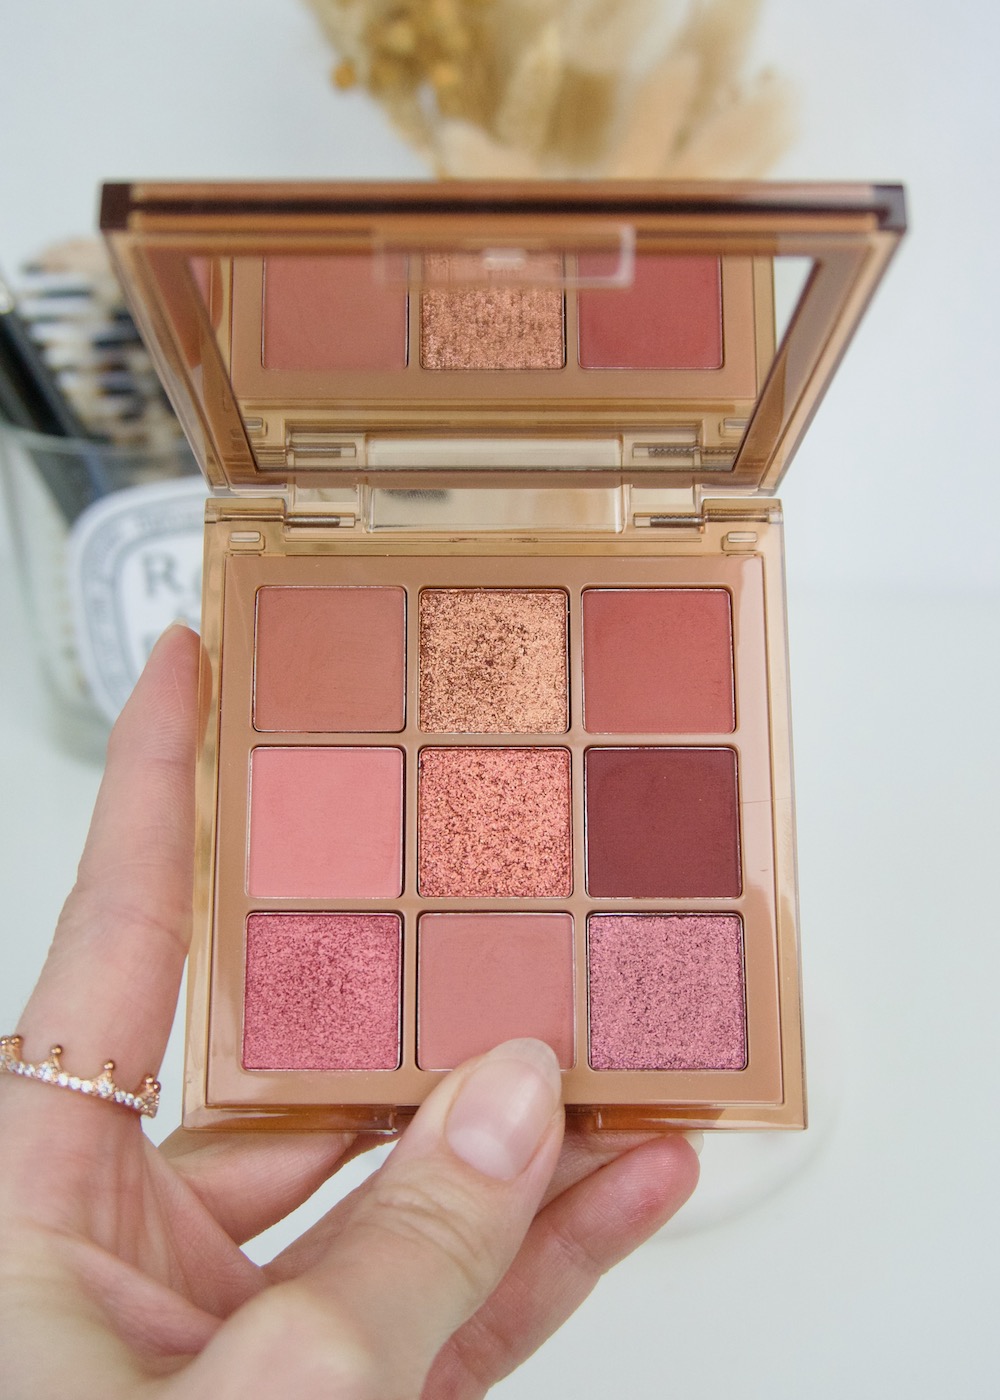 Huda Beauty Nude Obsessions Medium Palette dichtbij in hand